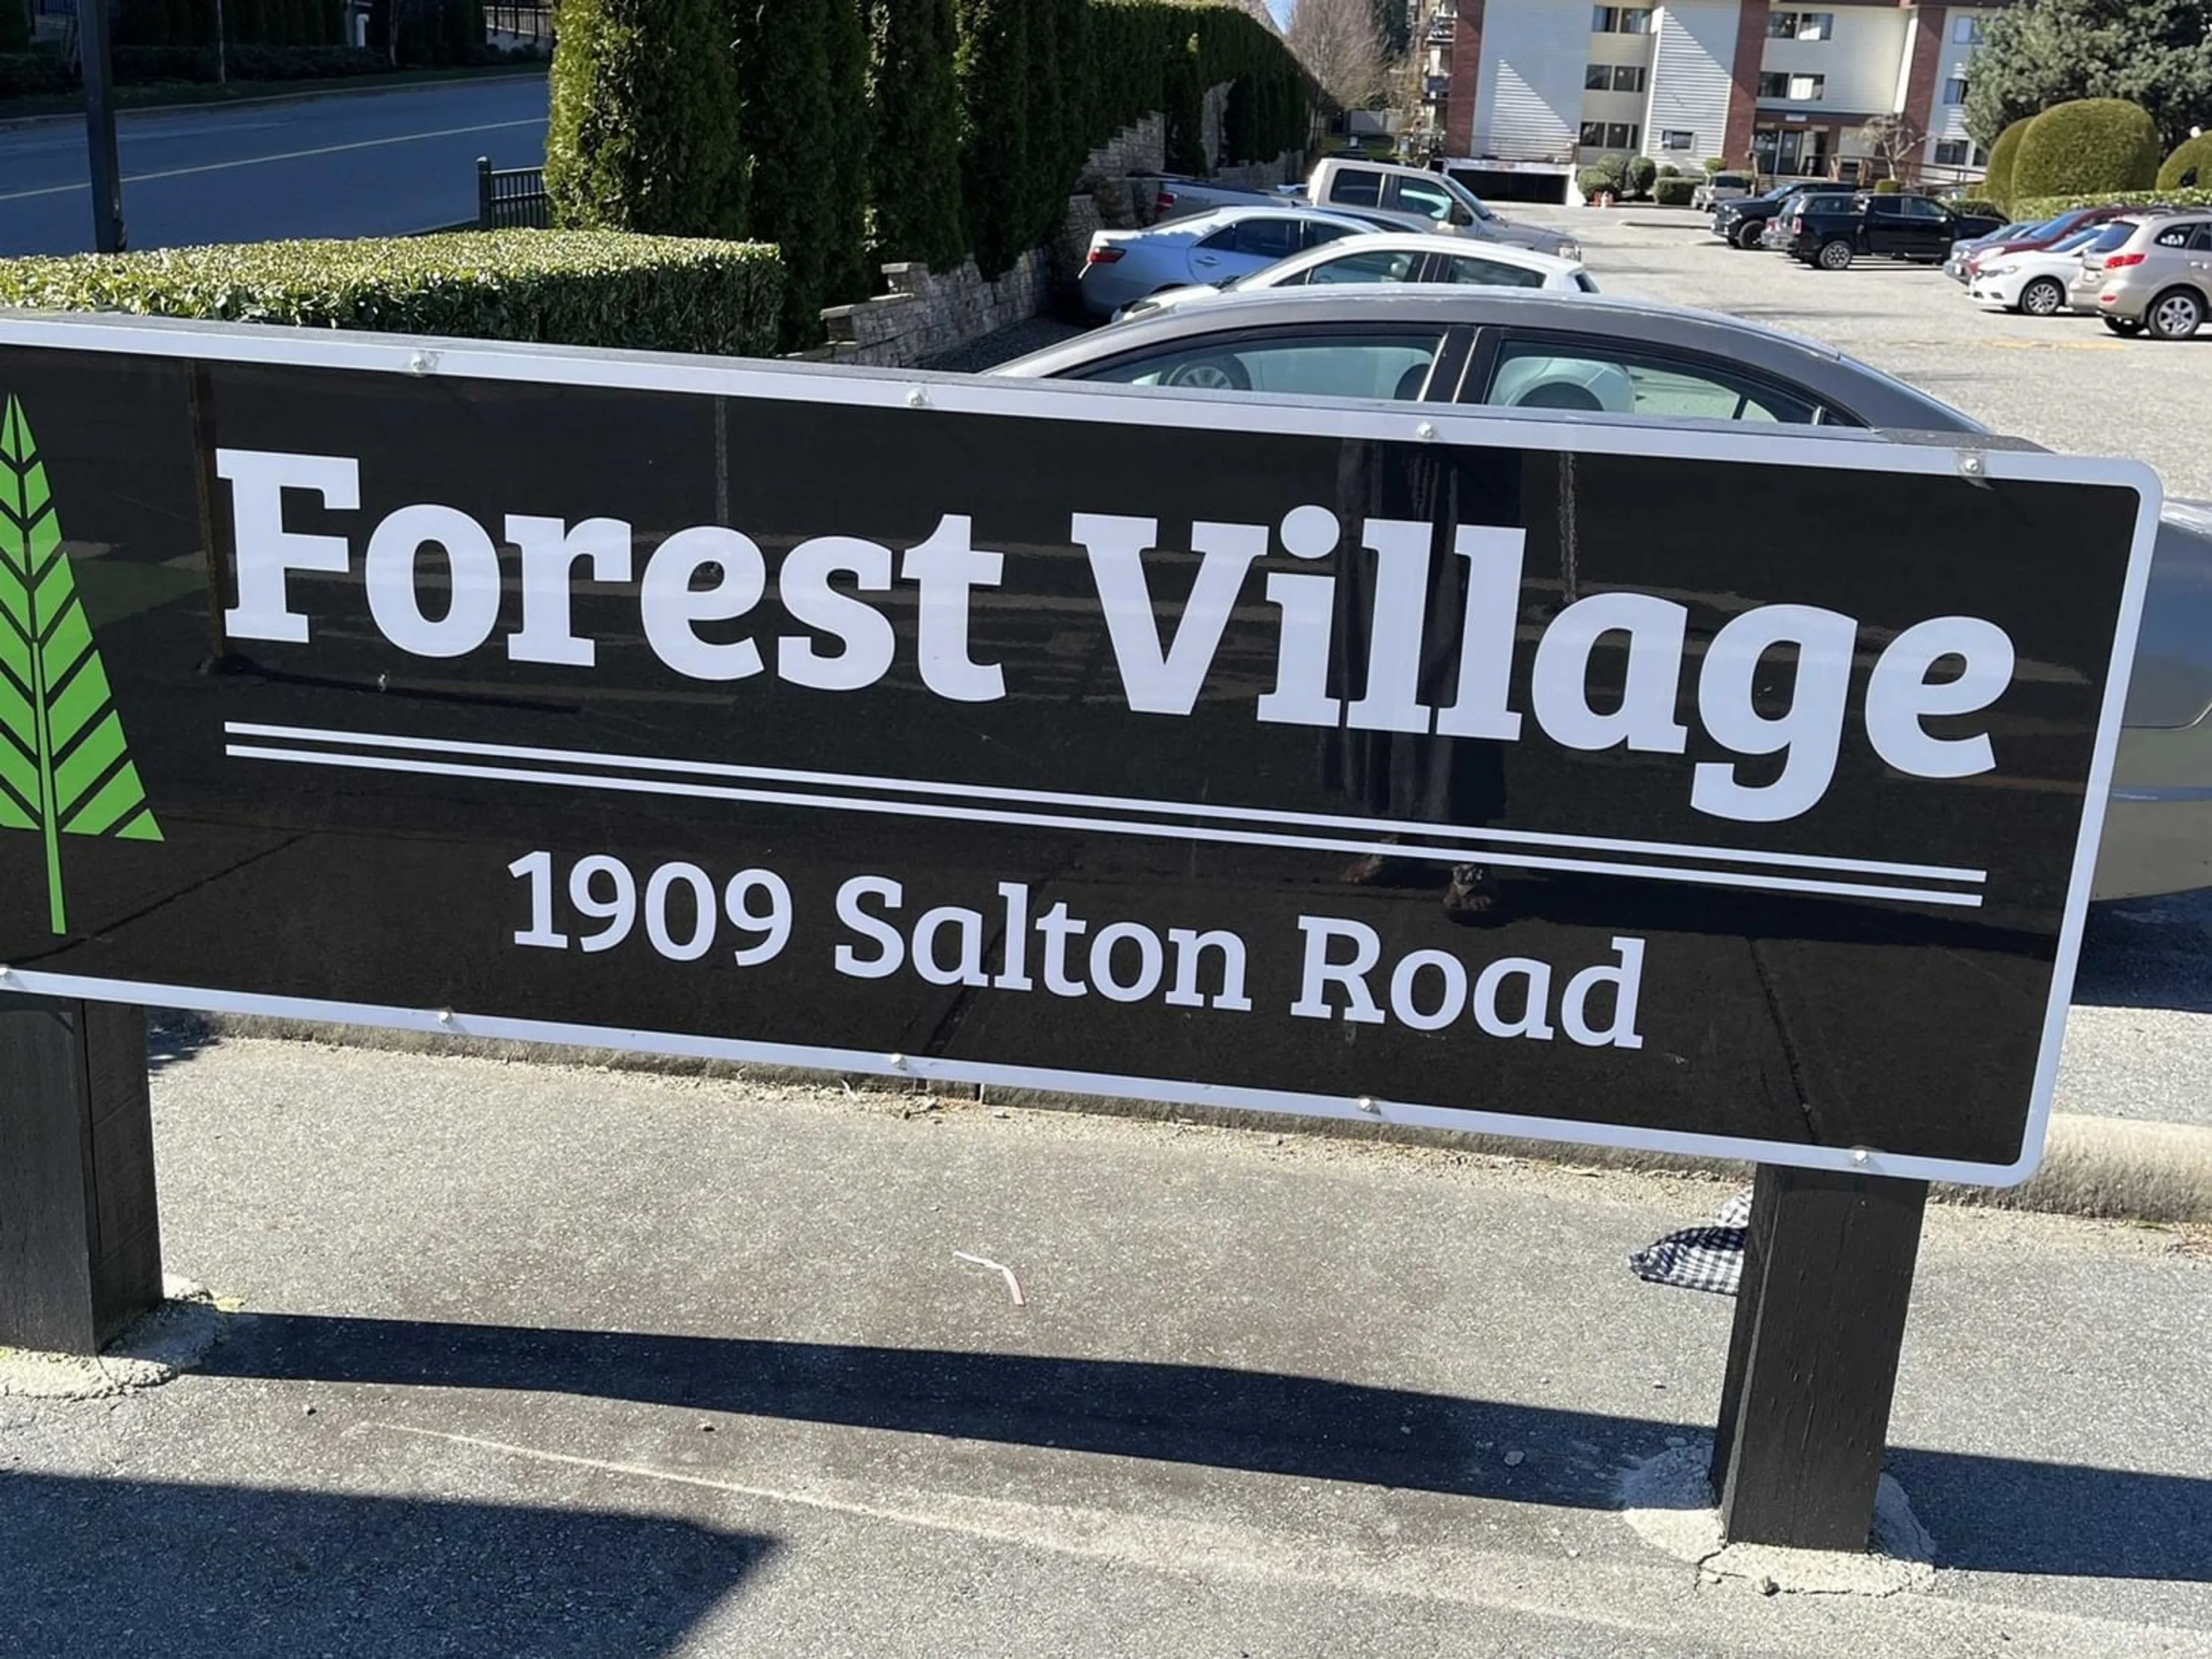 Forest view for 234 1909 SALTON ROAD, Abbotsford British Columbia V2S5B6